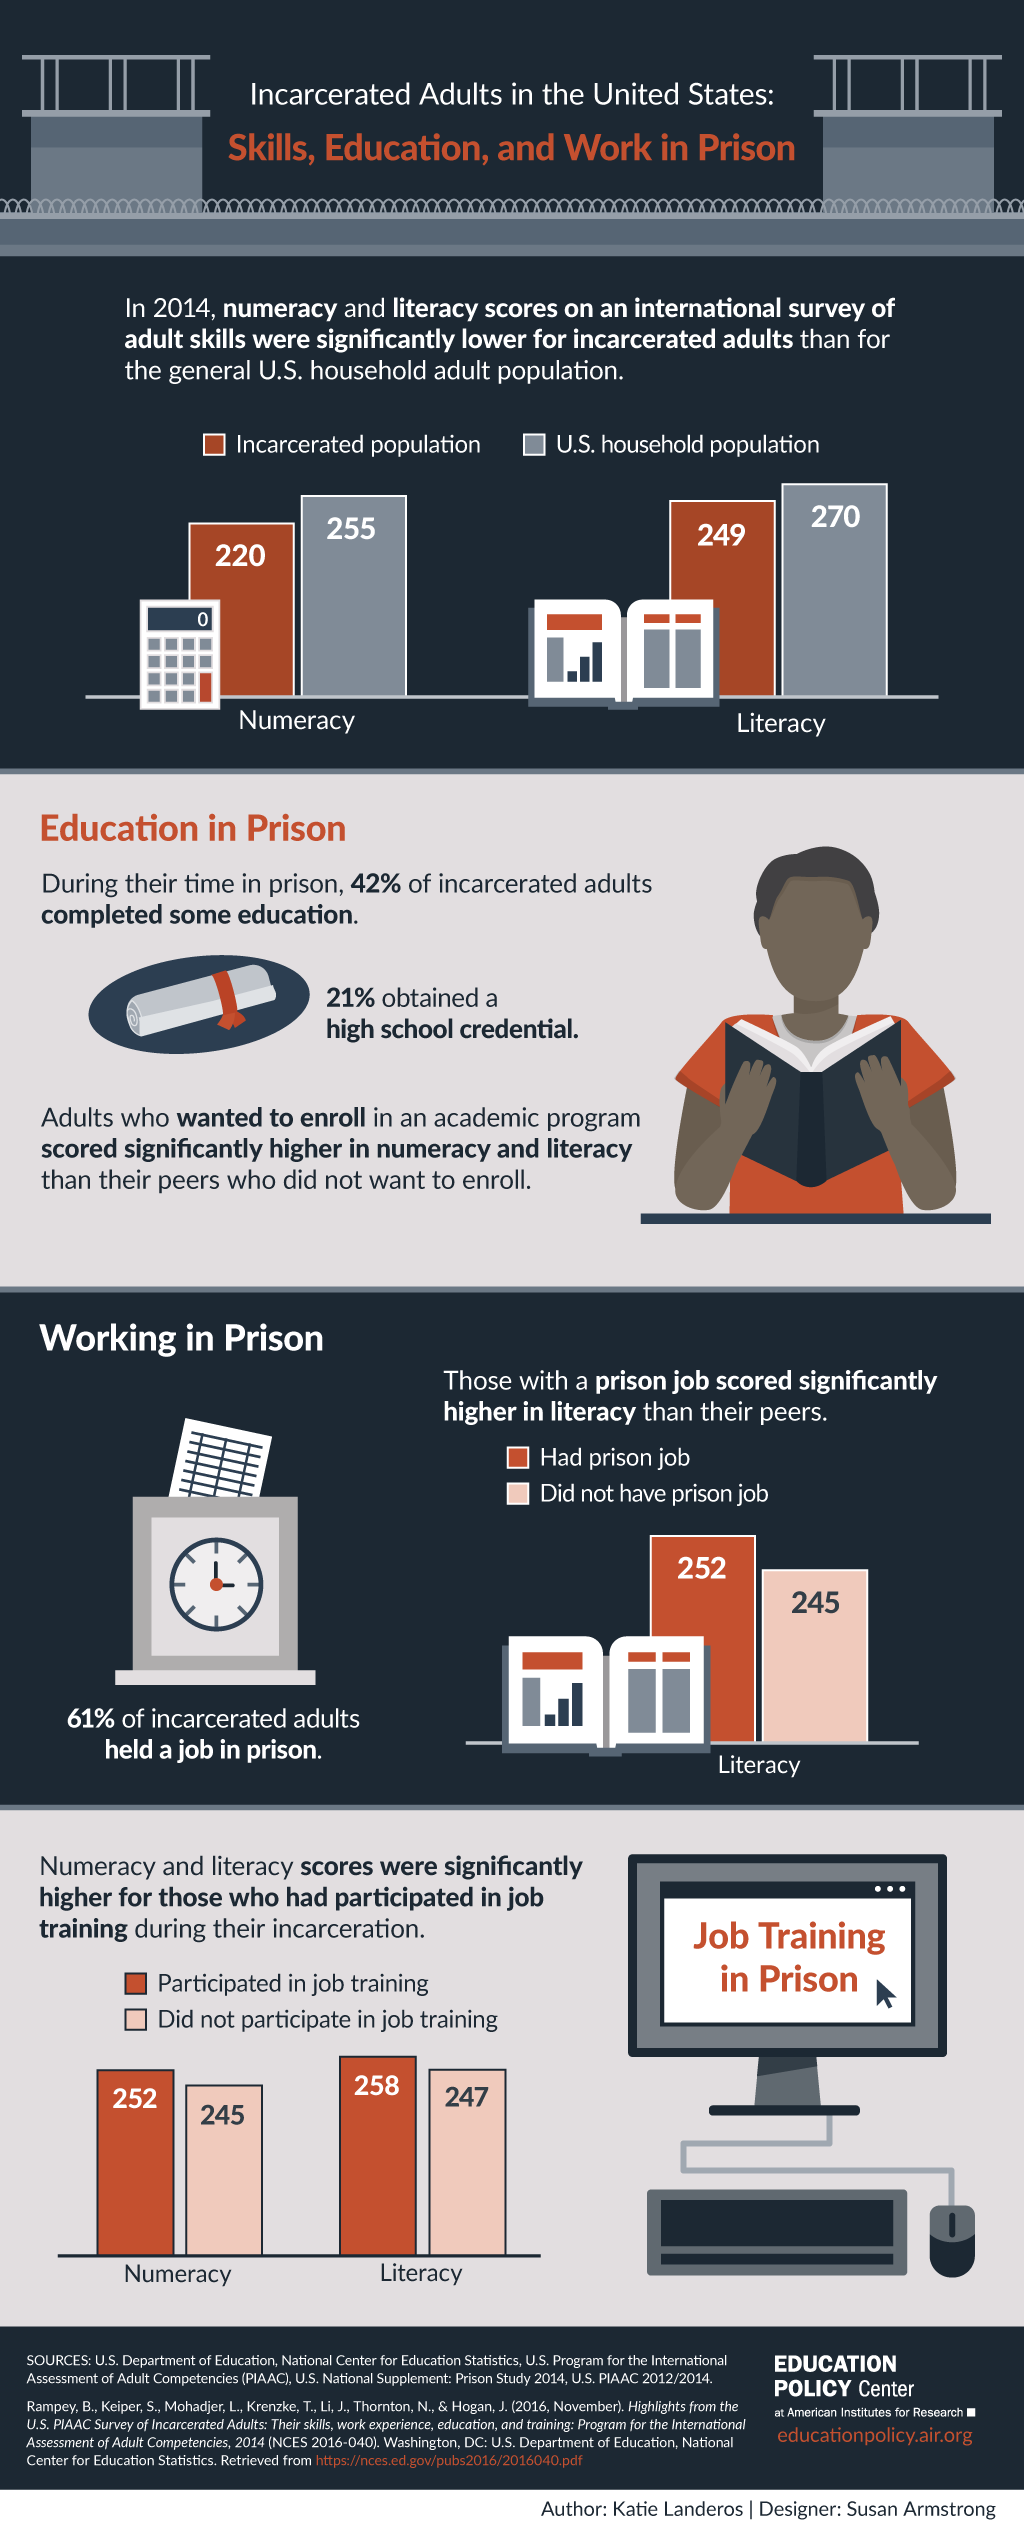 Incarcerated Adults in the United States: Skills, Education, and Work in Prison (Copy)